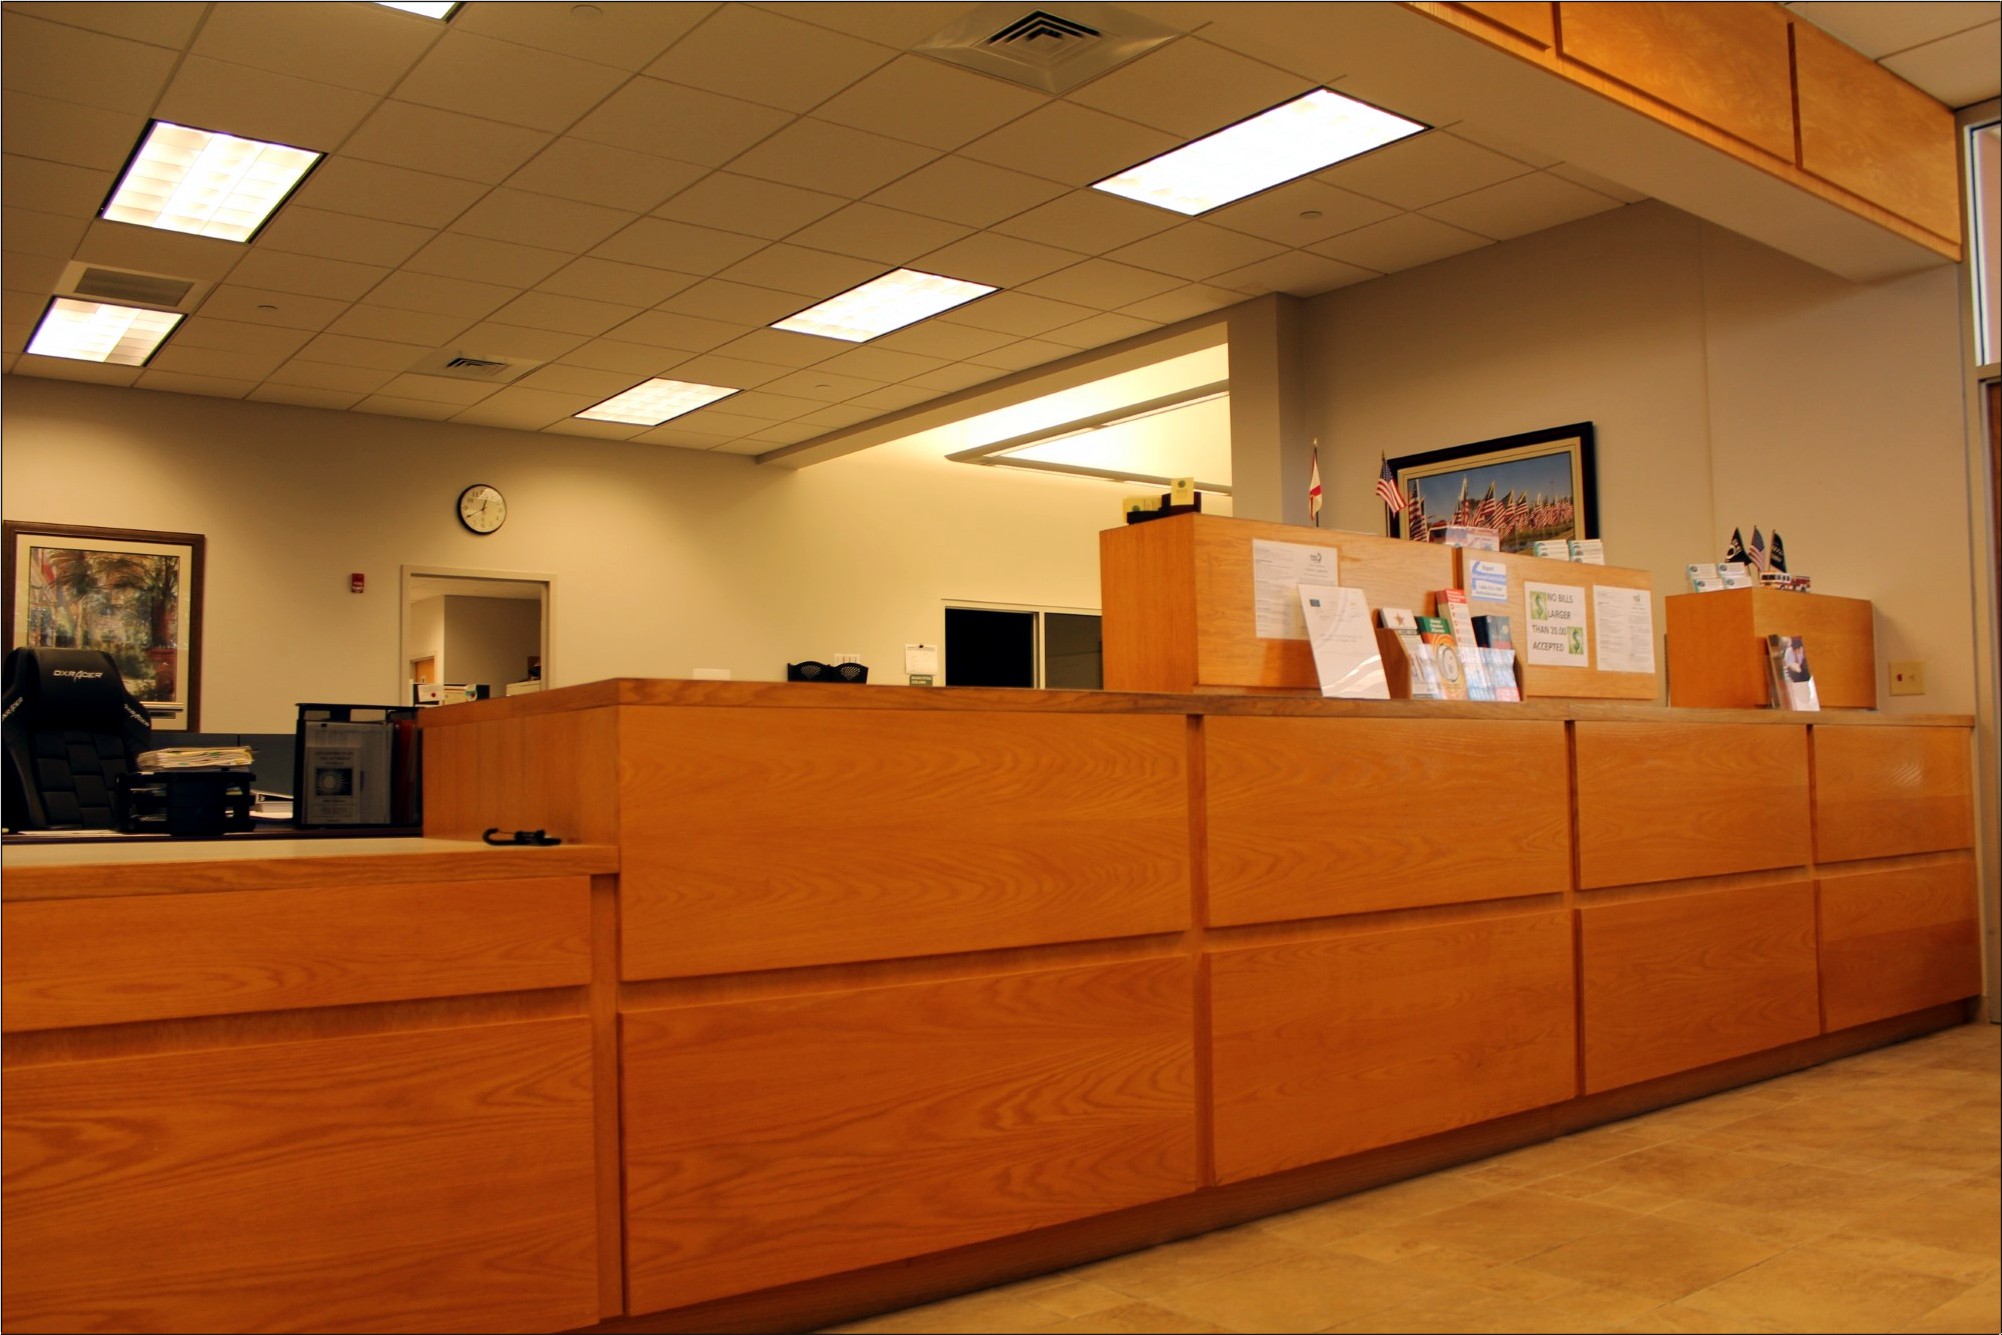 Building Department counter at 9199 113th Street, Seminole, FL 33772